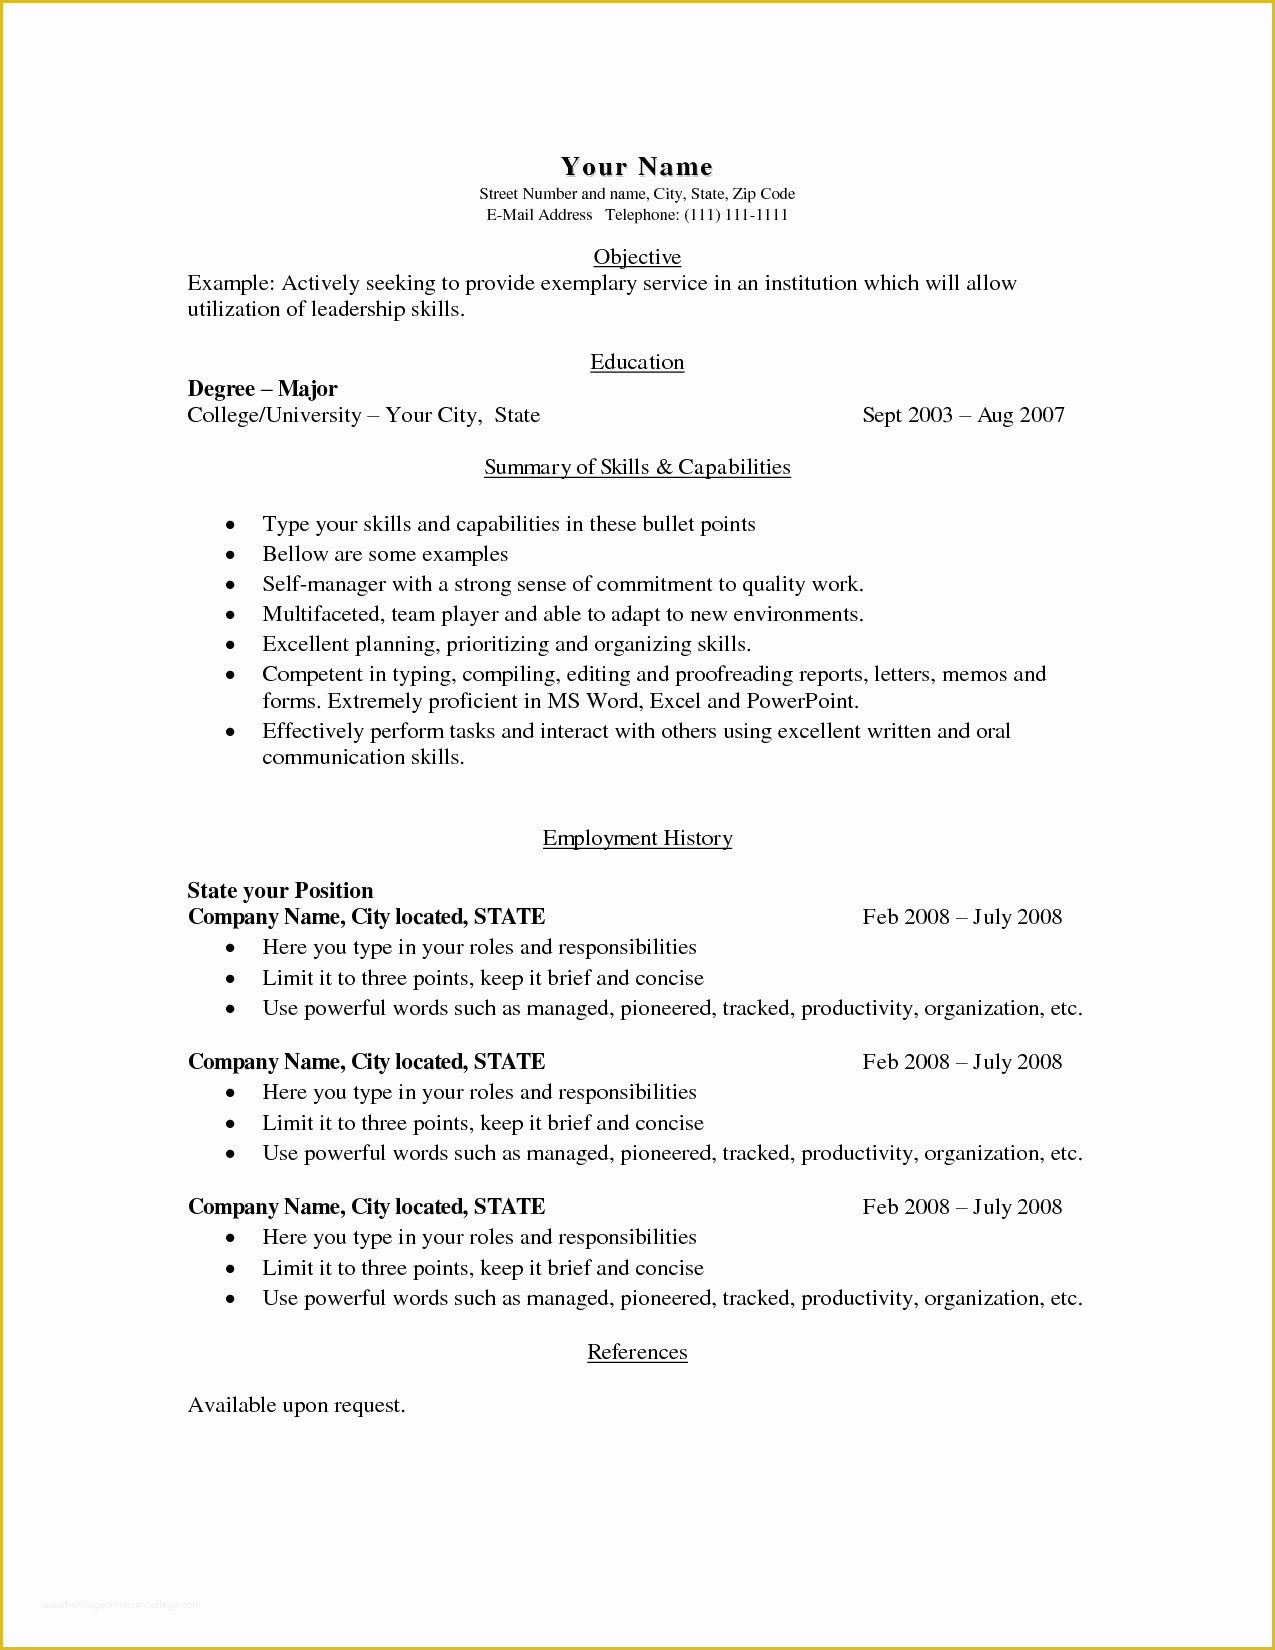 Easy Resume Template Free Of 10 Best Of Easy Resume Templates to Use Simple